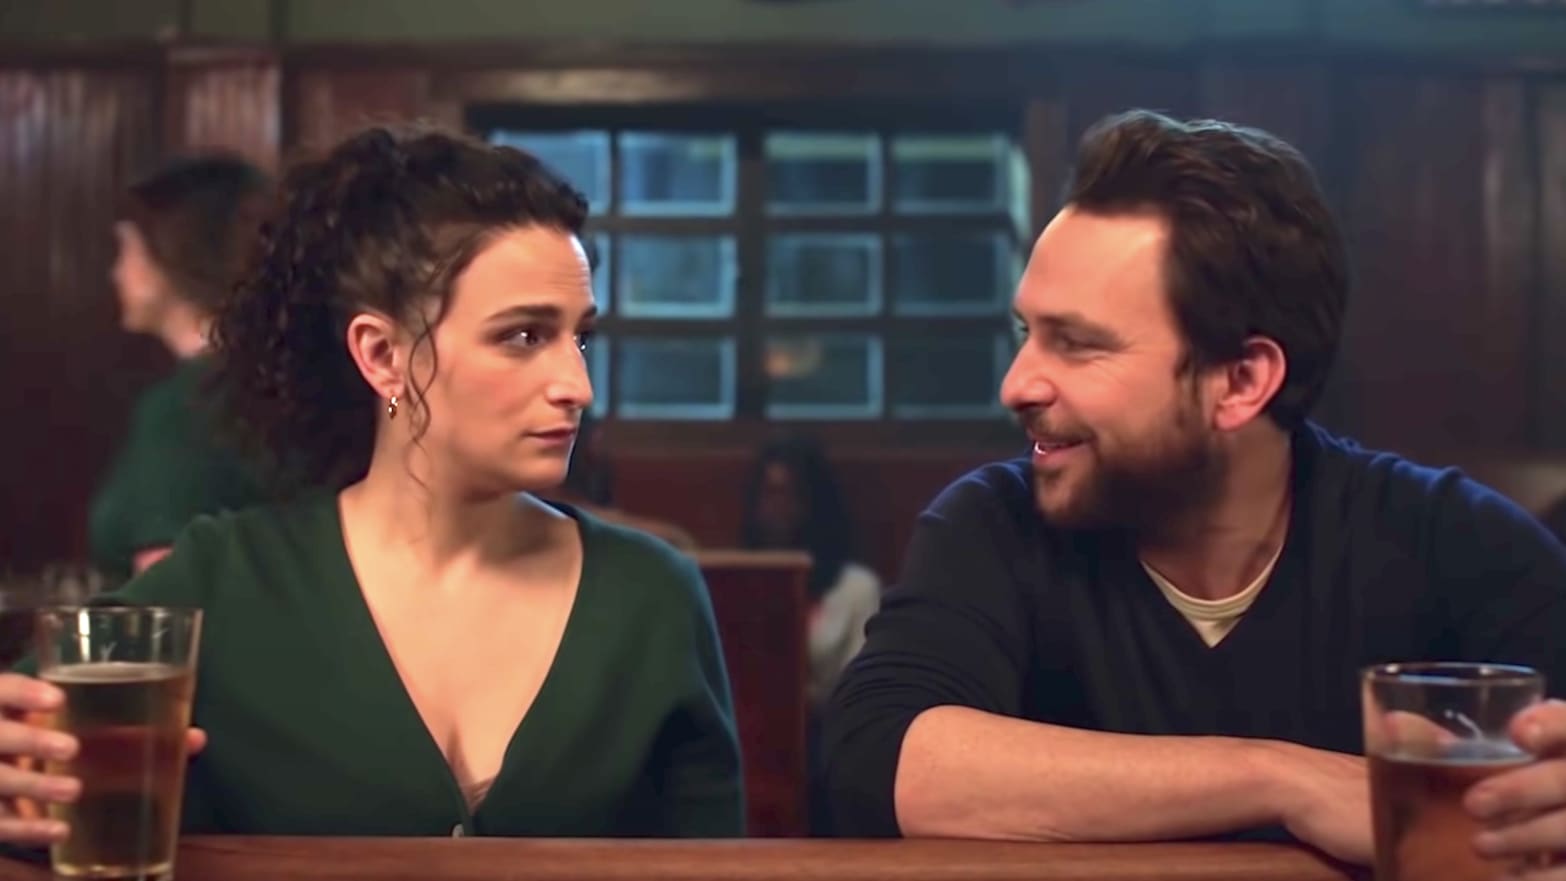 I Want You Back's Jenny Slate and Charlie Day on the Most Romantic